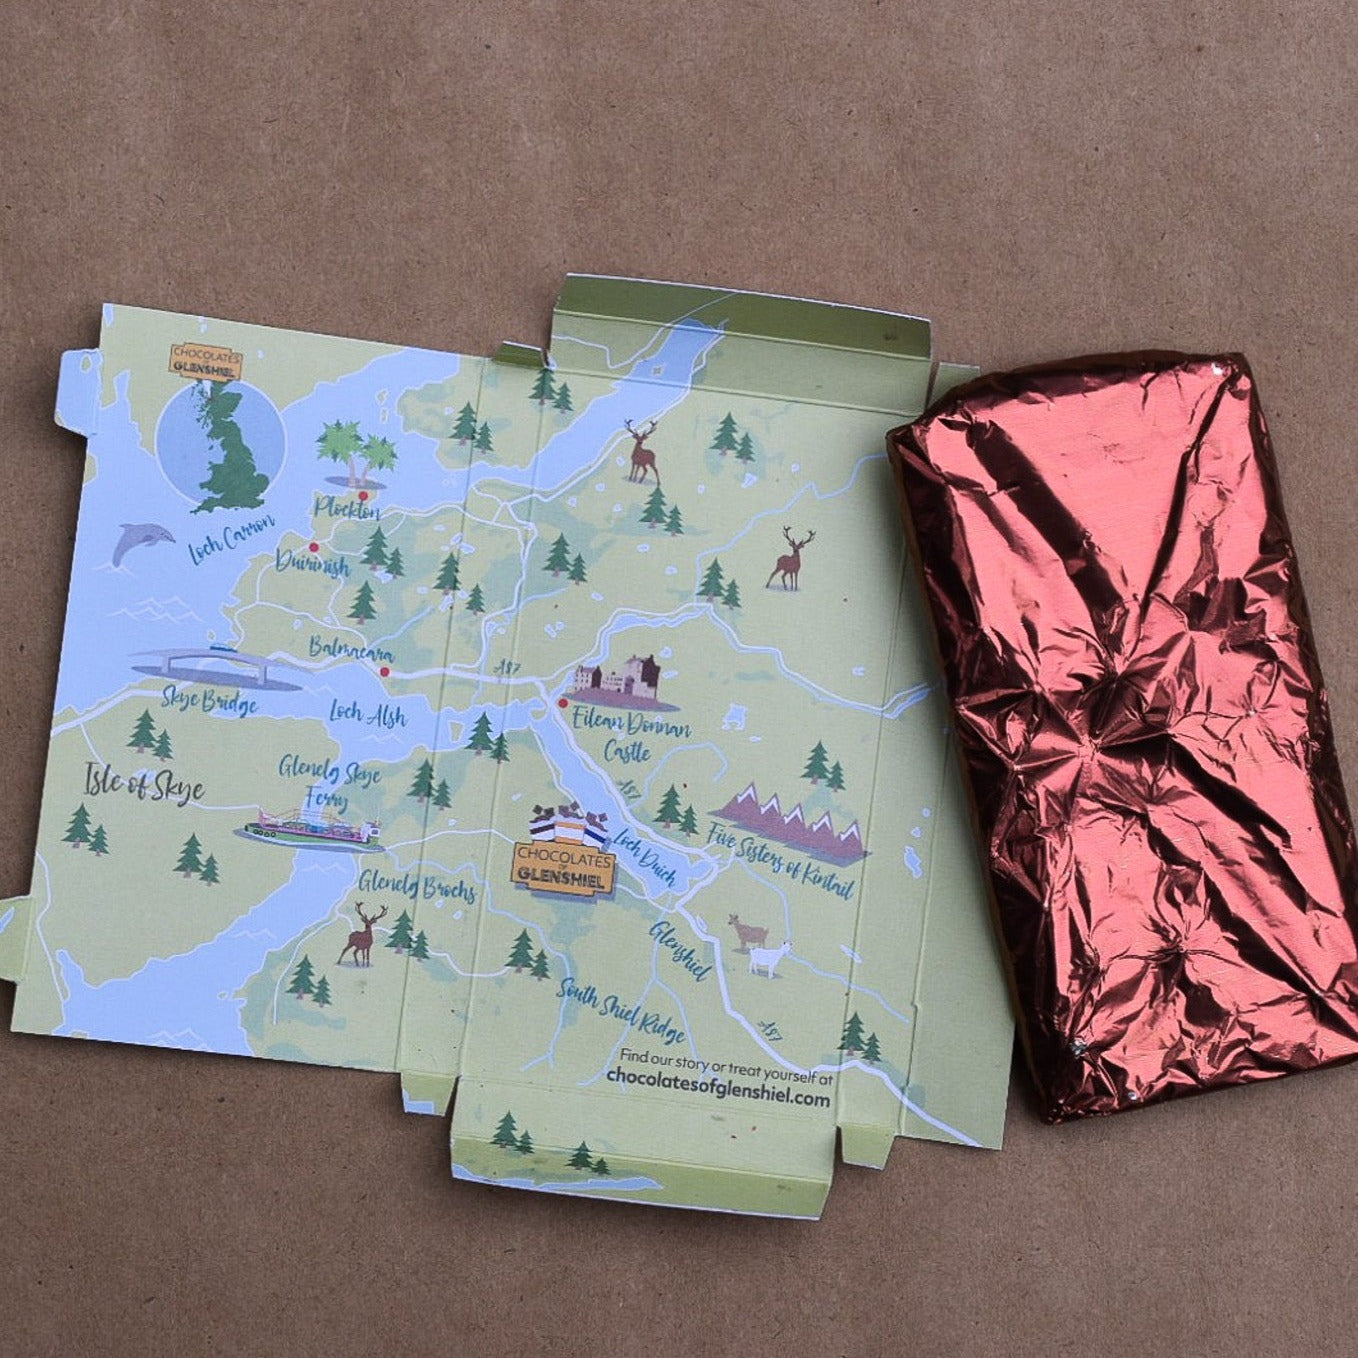 Chocolate bar in a foil wrapping displayed next to an opened chocolate bar package. The opened package has a design of the map of Glen Shiel Scotland on it.